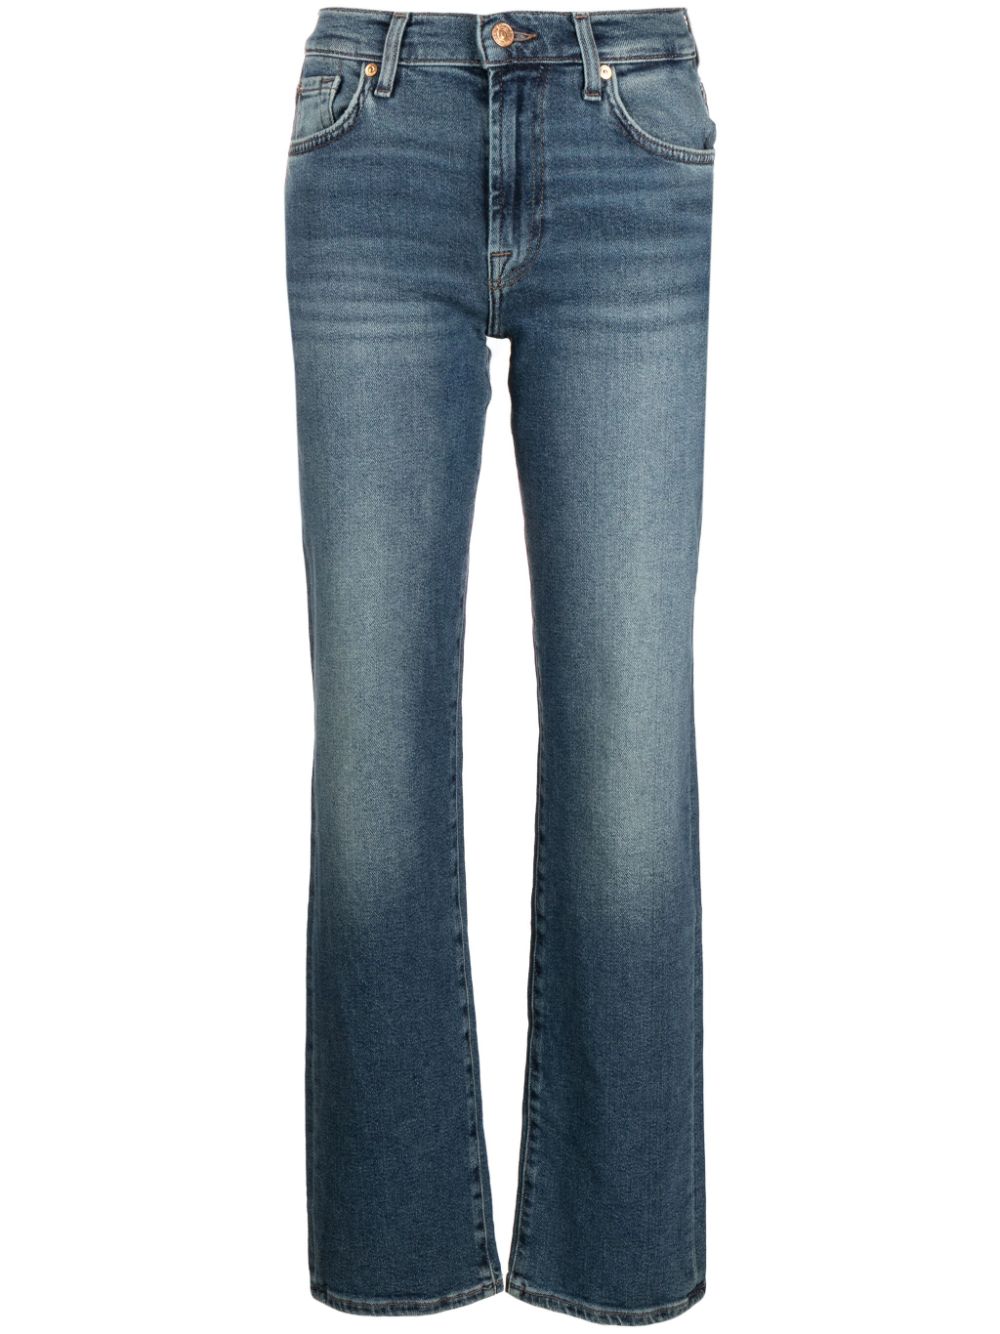 7 For All Mankind Ellie mid-rise straight-leg jeans - Blue von 7 For All Mankind